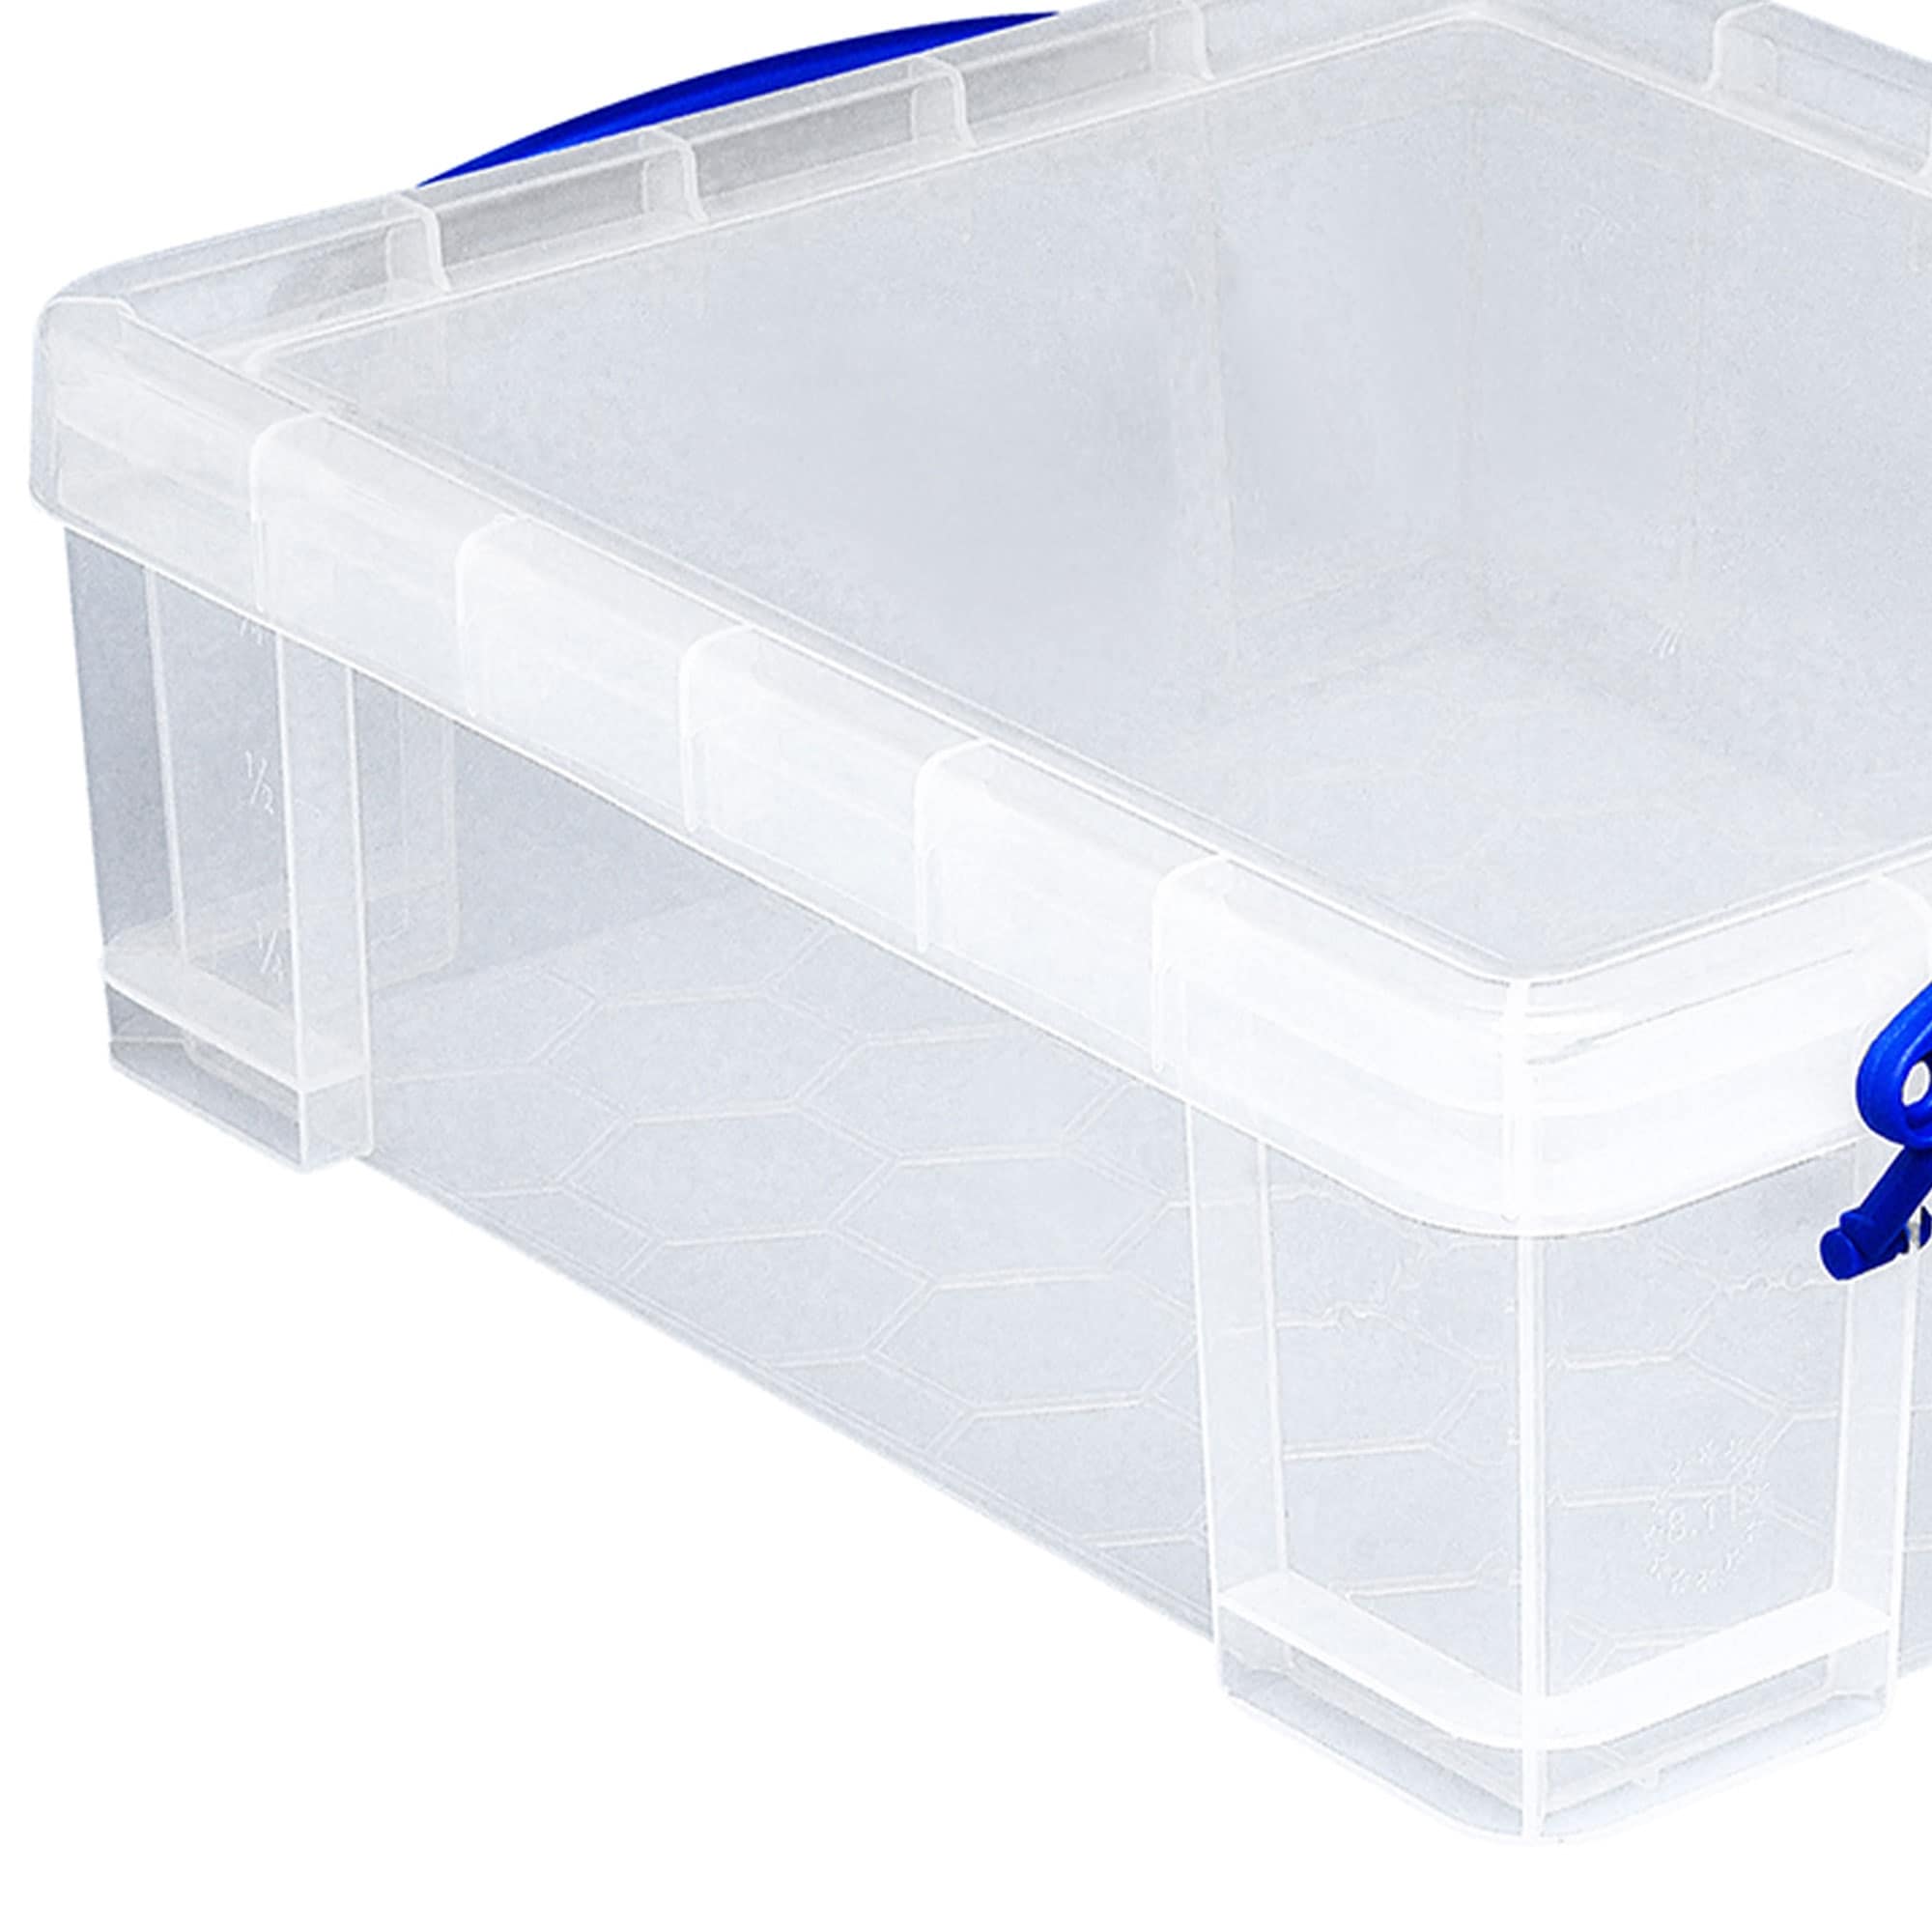 https://ak1.ostkcdn.com/images/products/is/images/direct/ad1f6fe433b3bbc5e359bf2be0aae8f5515ce936/Really-Useful-Box-8.1L-Plastic-Storage-Container-w-Snap-Lid-%26-Clip-Lock-Handle.jpg